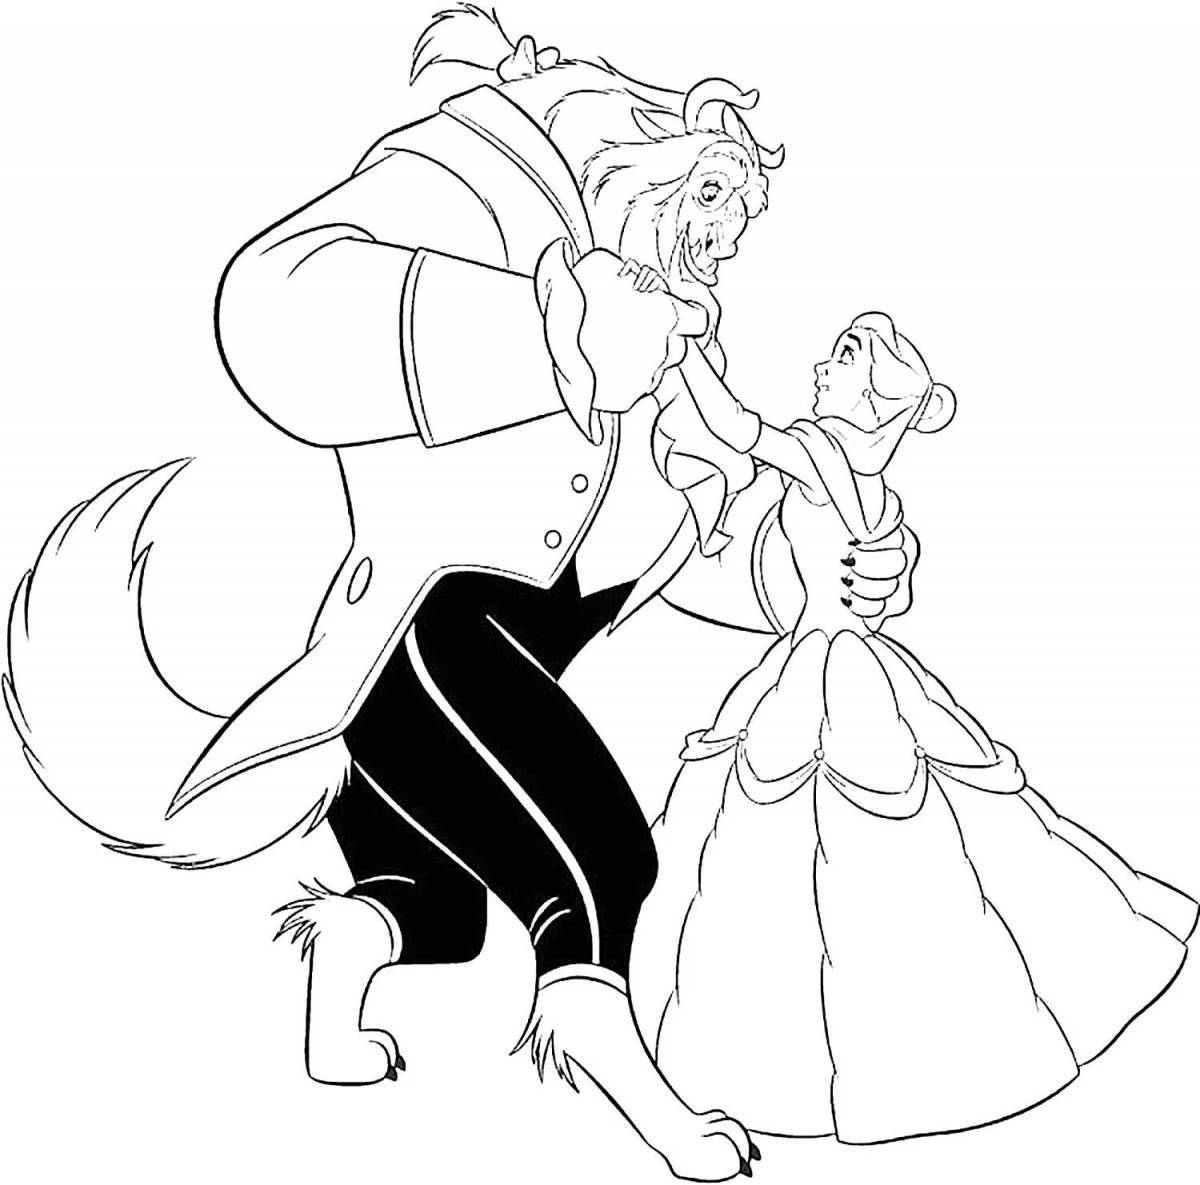 Luminous belle and monster coloring page